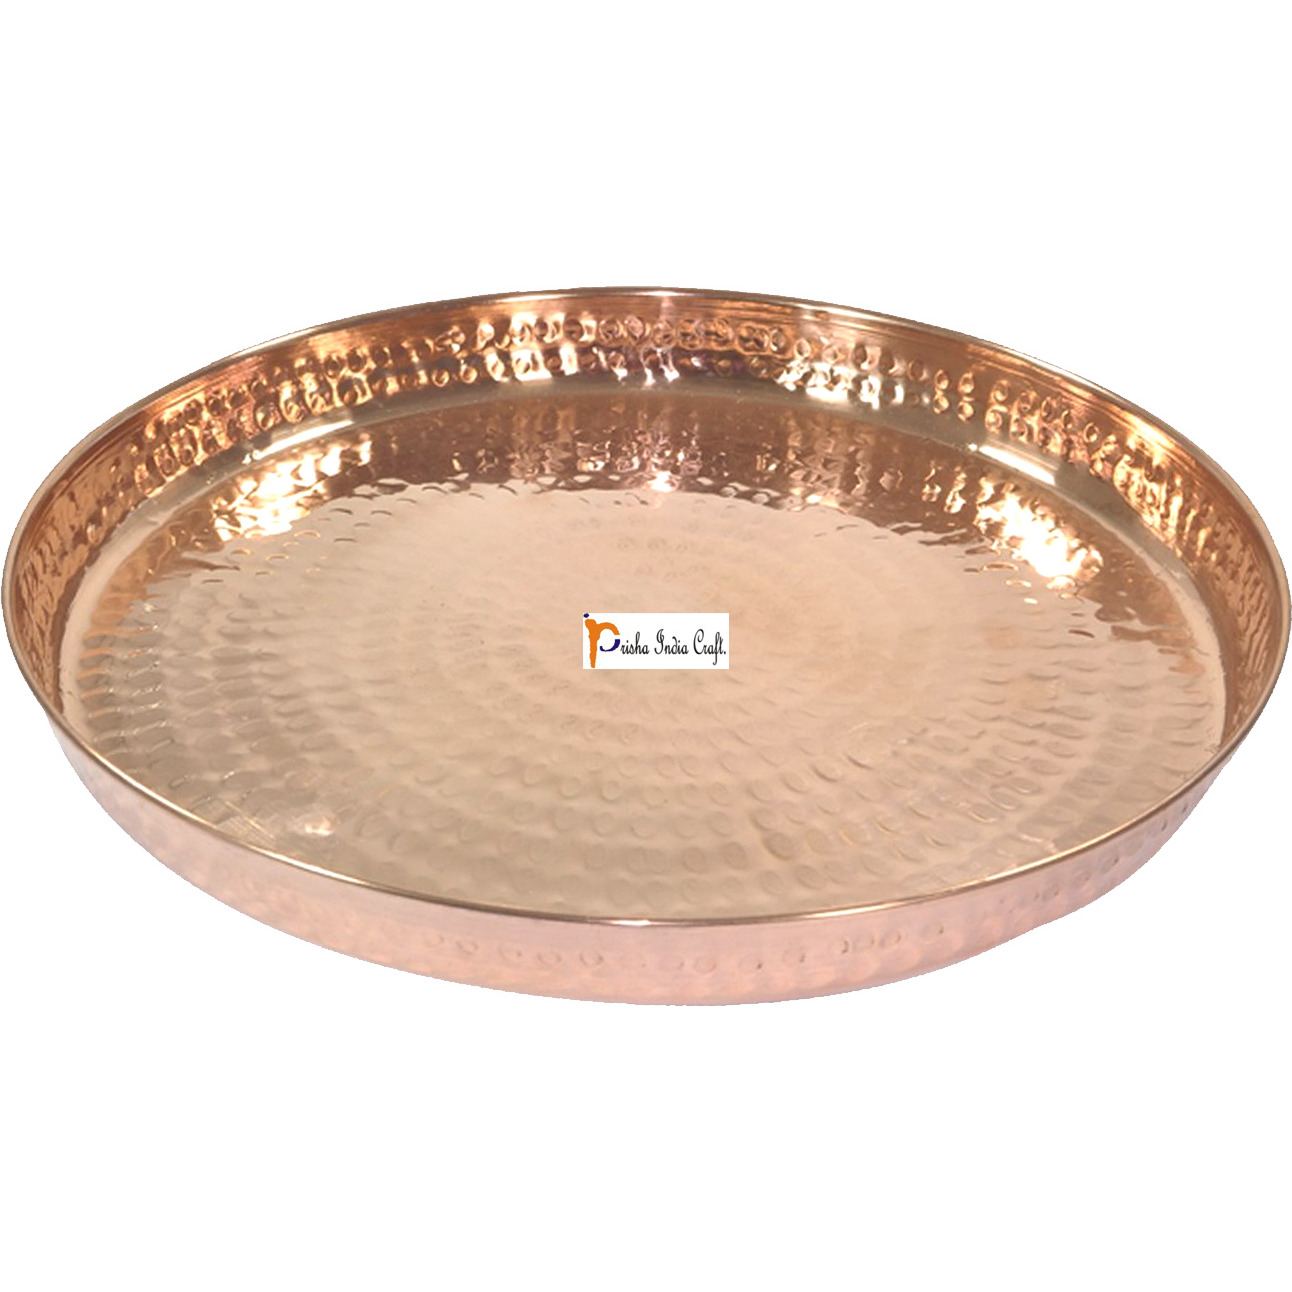 Set of 3 Prisha India Craft B. Indian Dinnerware Pure Copper Thali Set Dia 12  Traditional Dinner Set of Plate, Bowl, Spoons, Glass with Napkin ring and Coaster - Christmas Gift